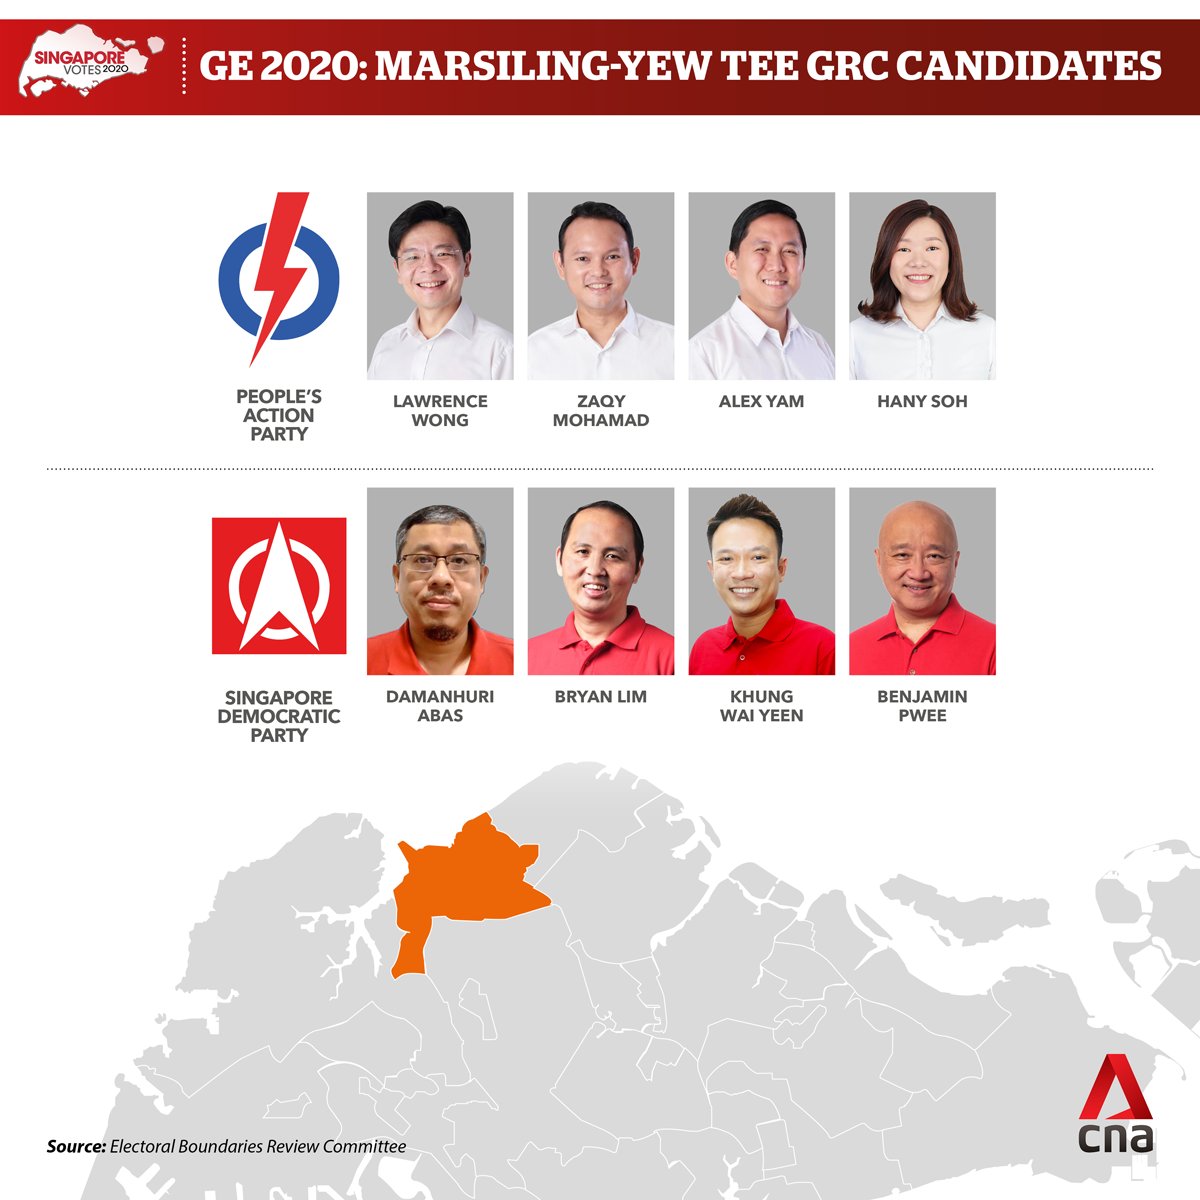  #GE2020  : Lawrence Wong leads the PAP team against the SDP in Marsiling-Yew Tee GRC  https://cna.asia/31voF6P 